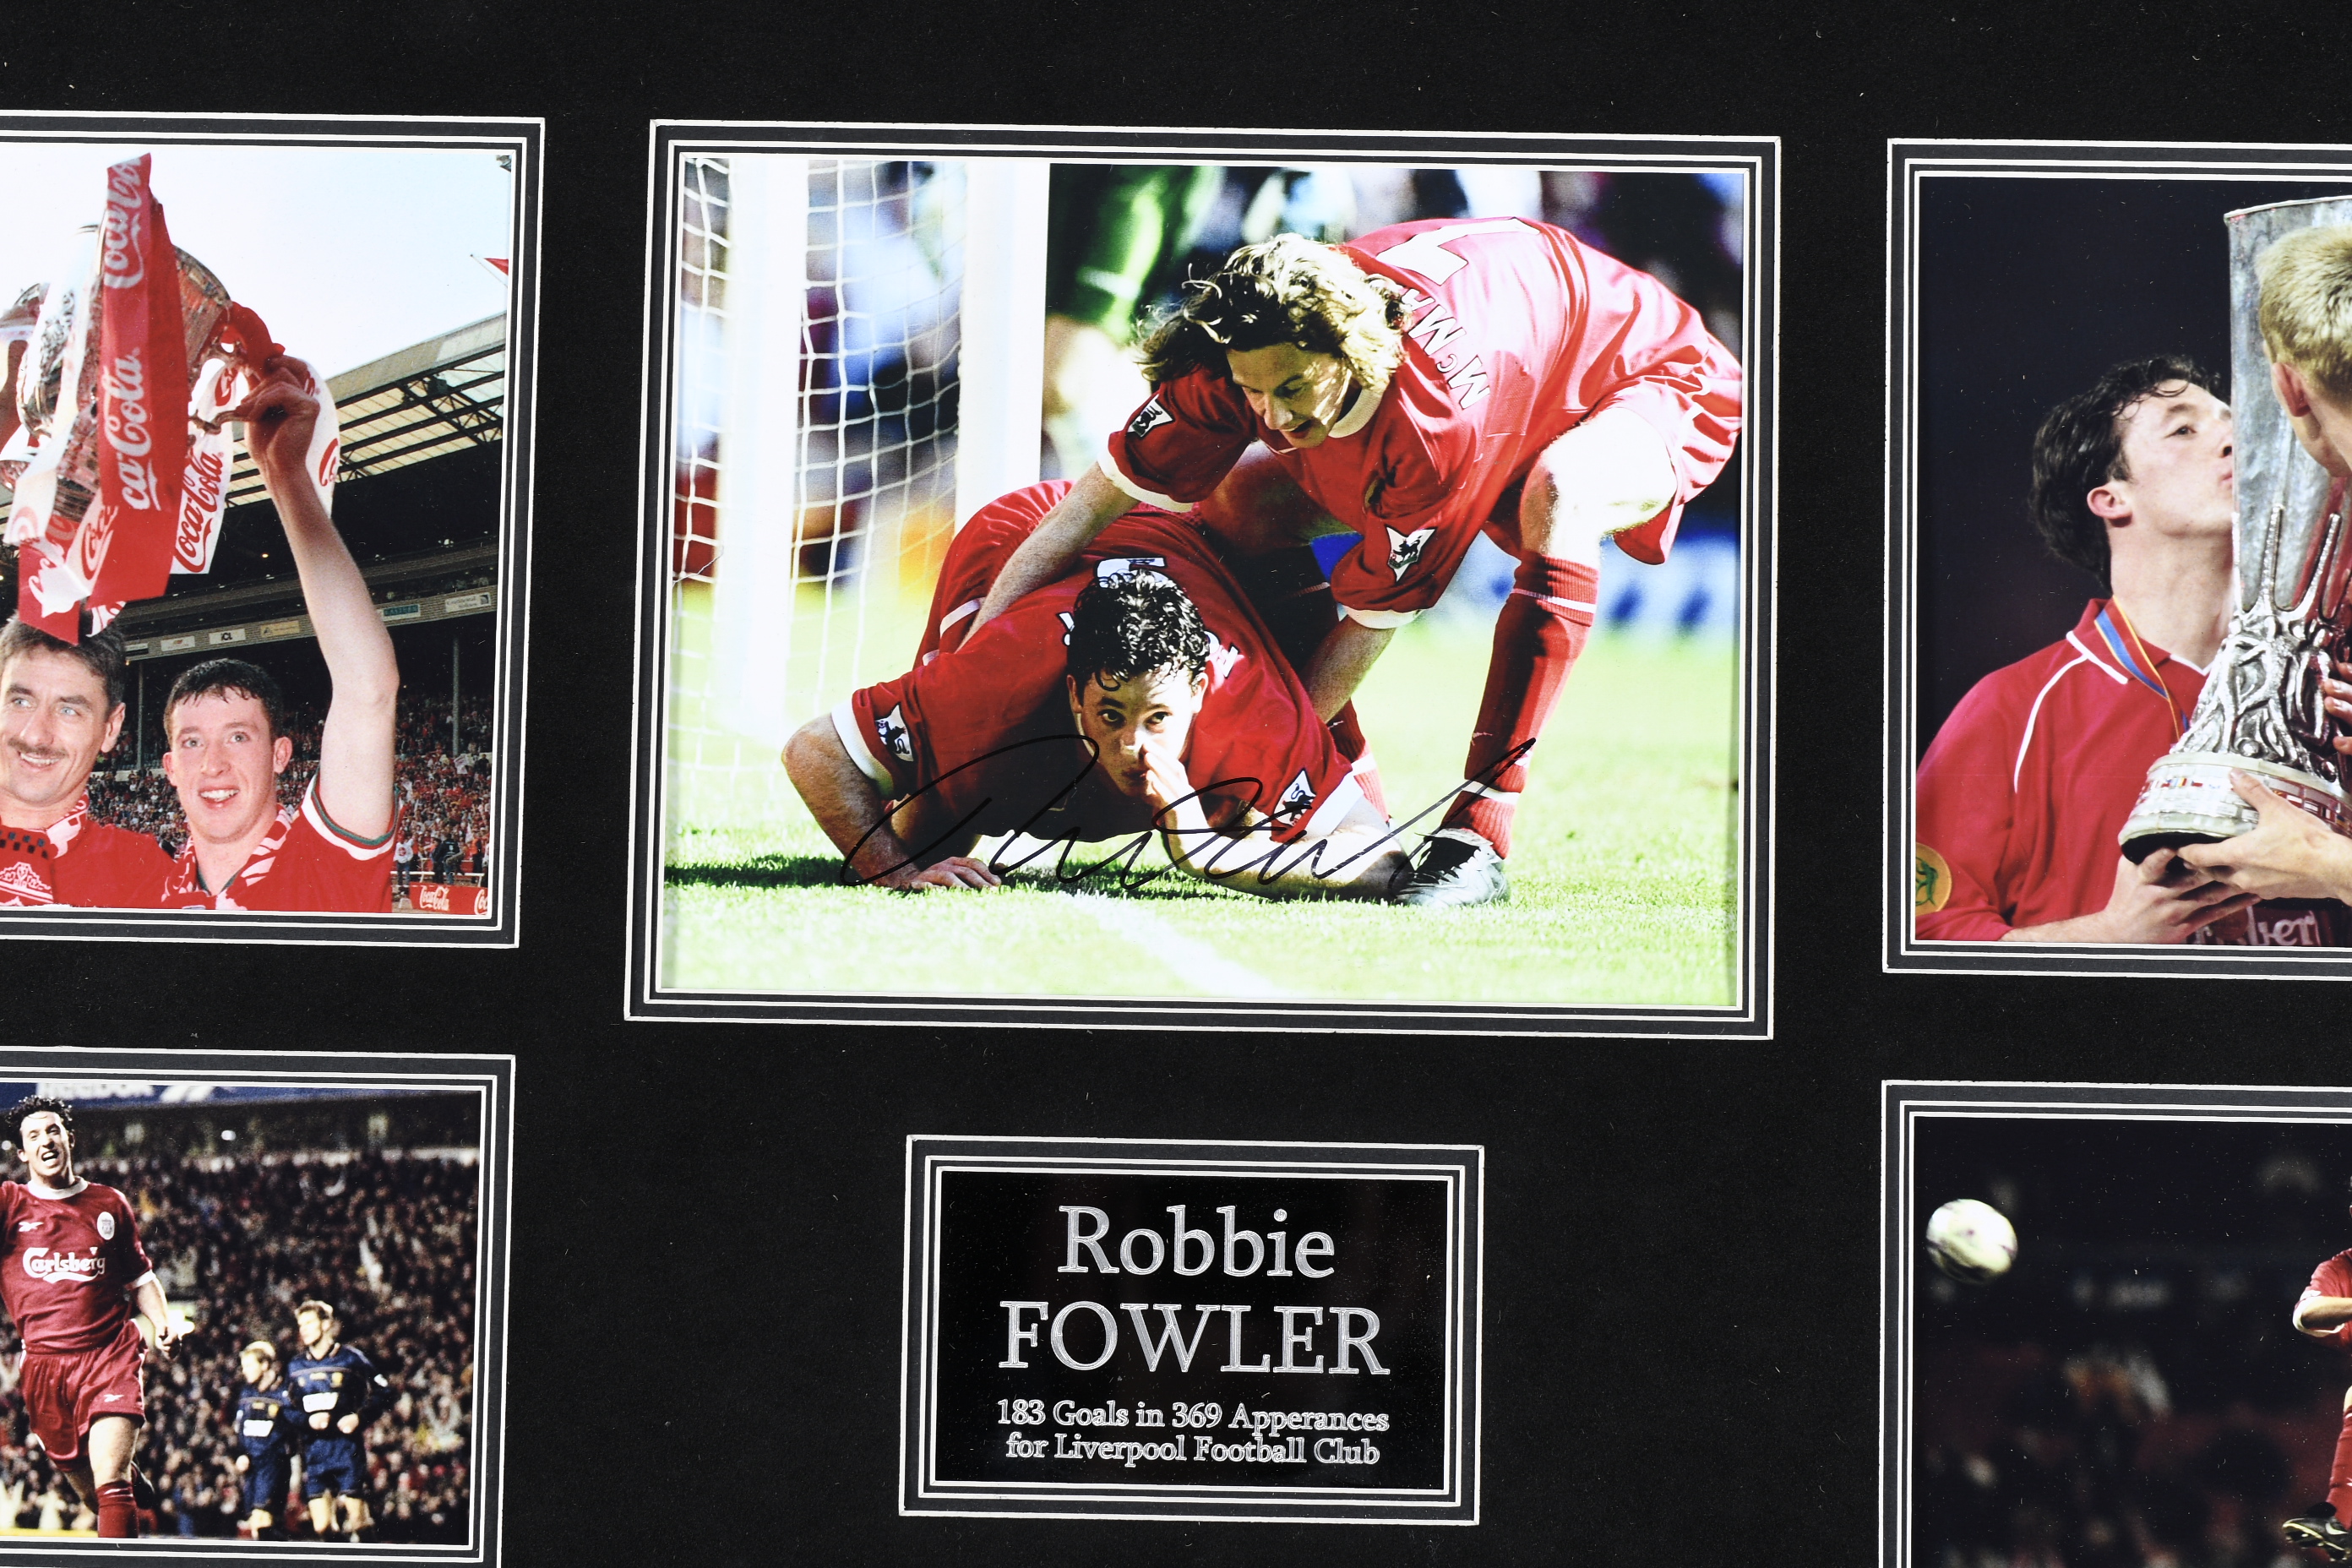 Robbie Fowler - Image 3 of 3